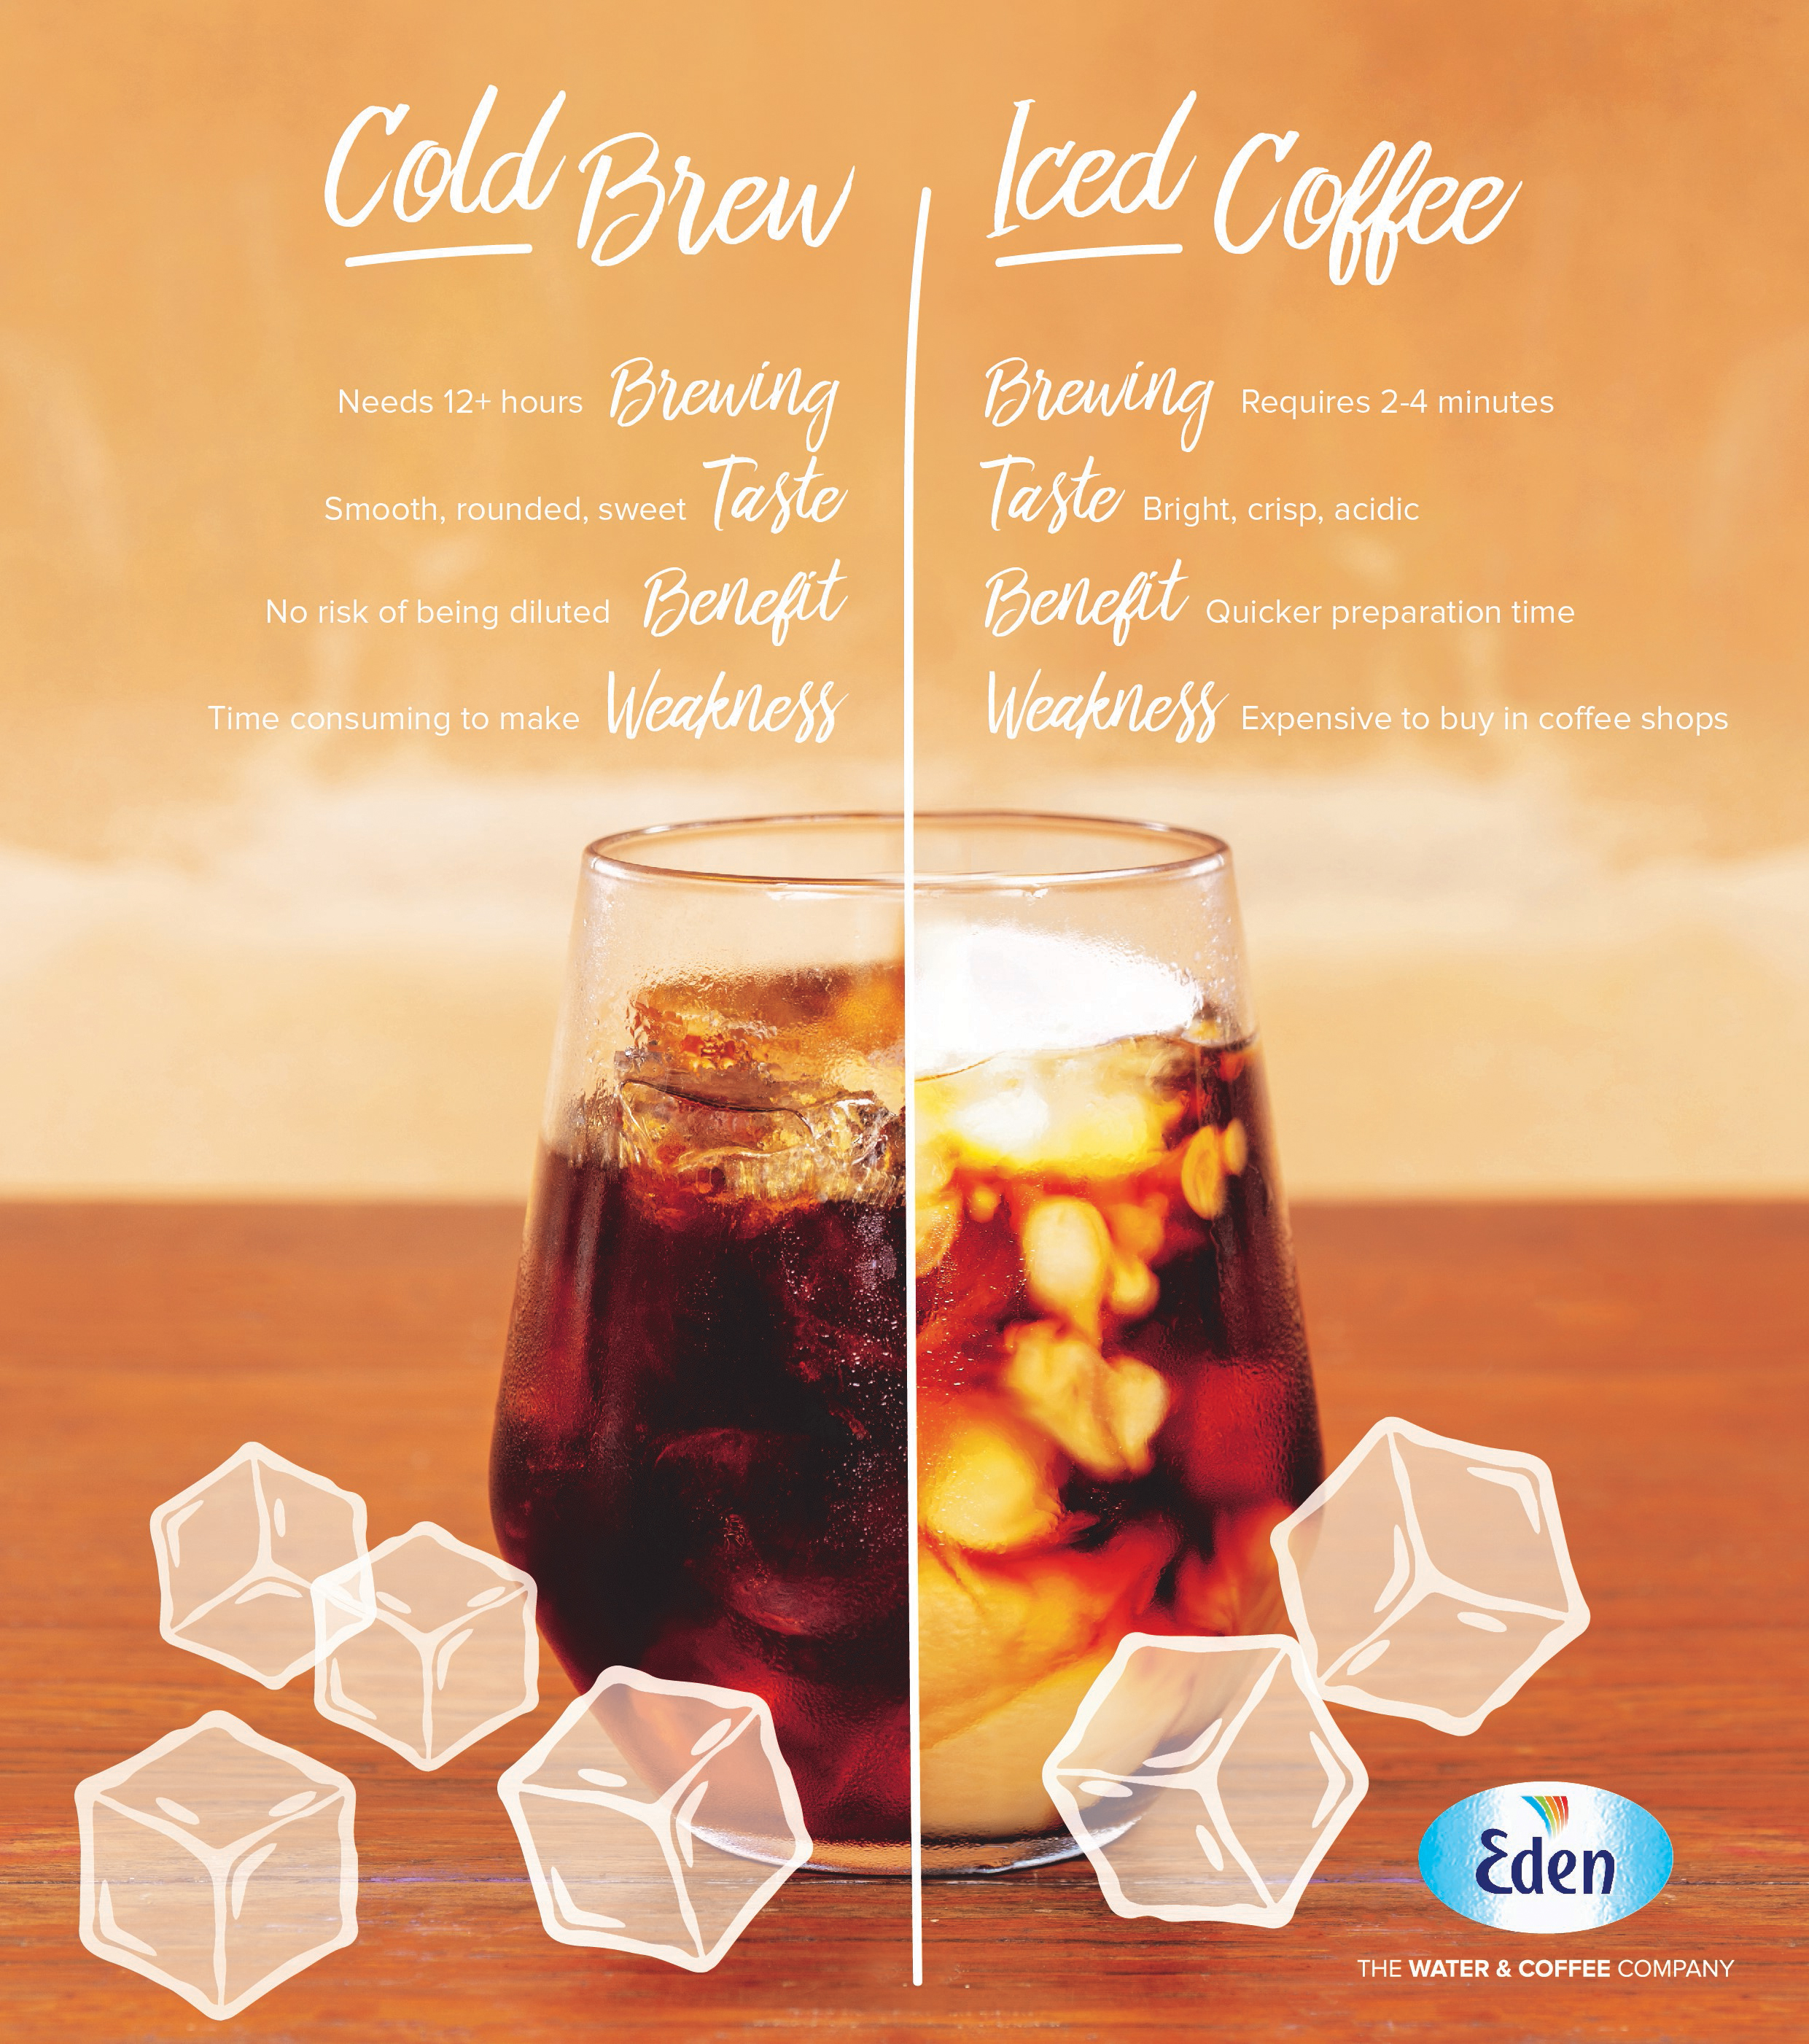 What's the Difference Between Cold Brew and Iced Coffee?